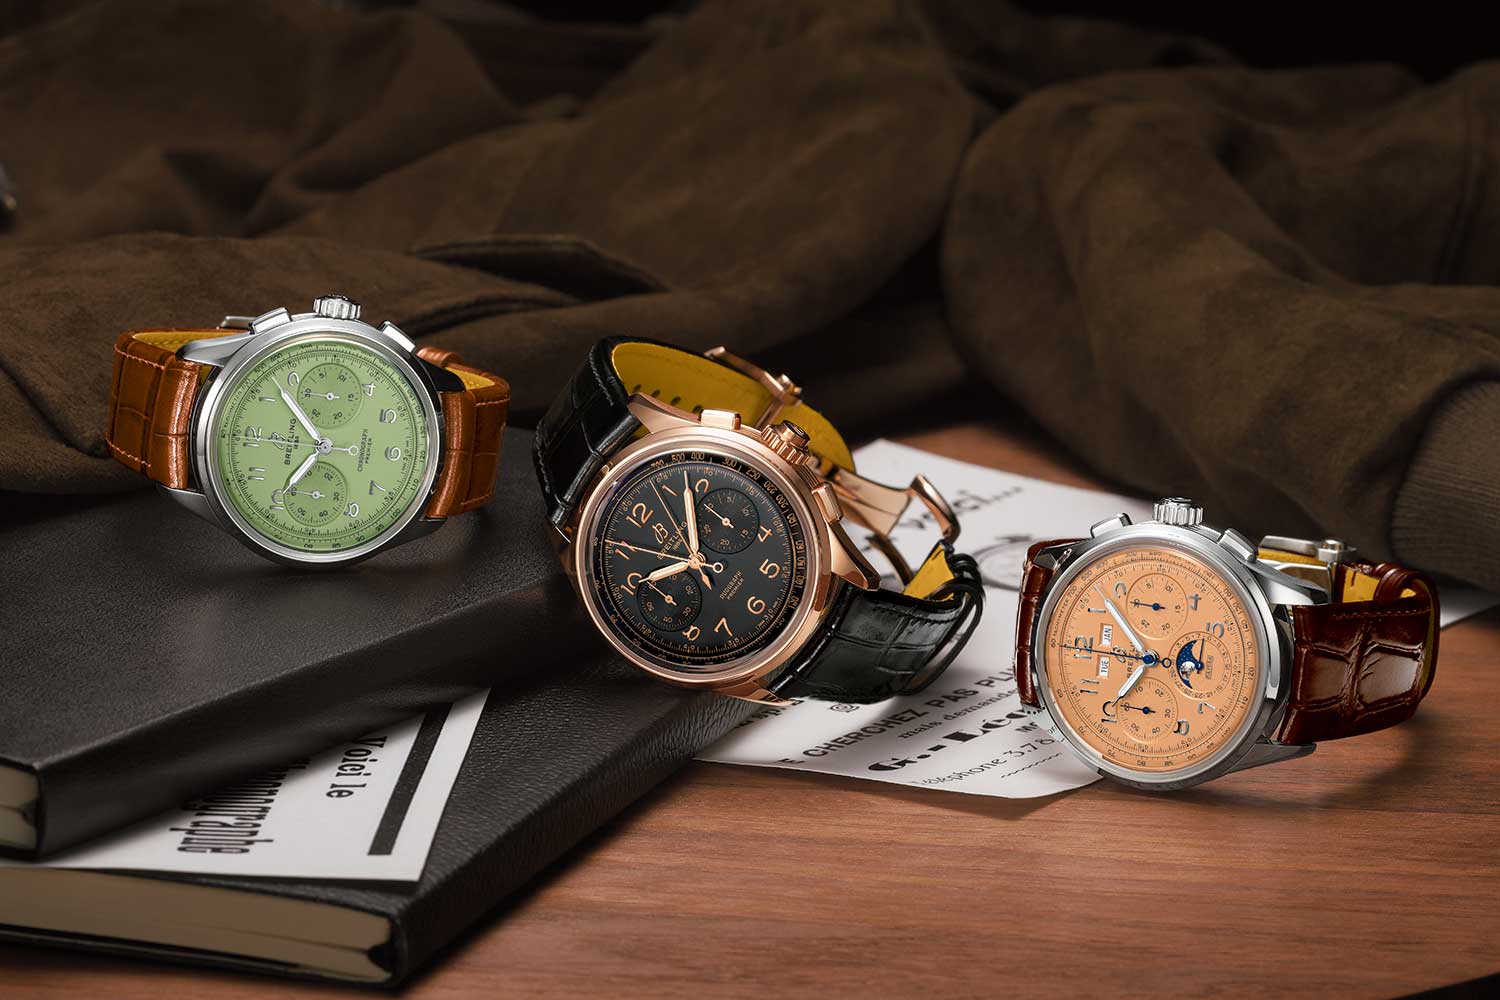 In red gold or steel, the opaline and black dials are the most classical expression of the Premier’s elegant aesthetic